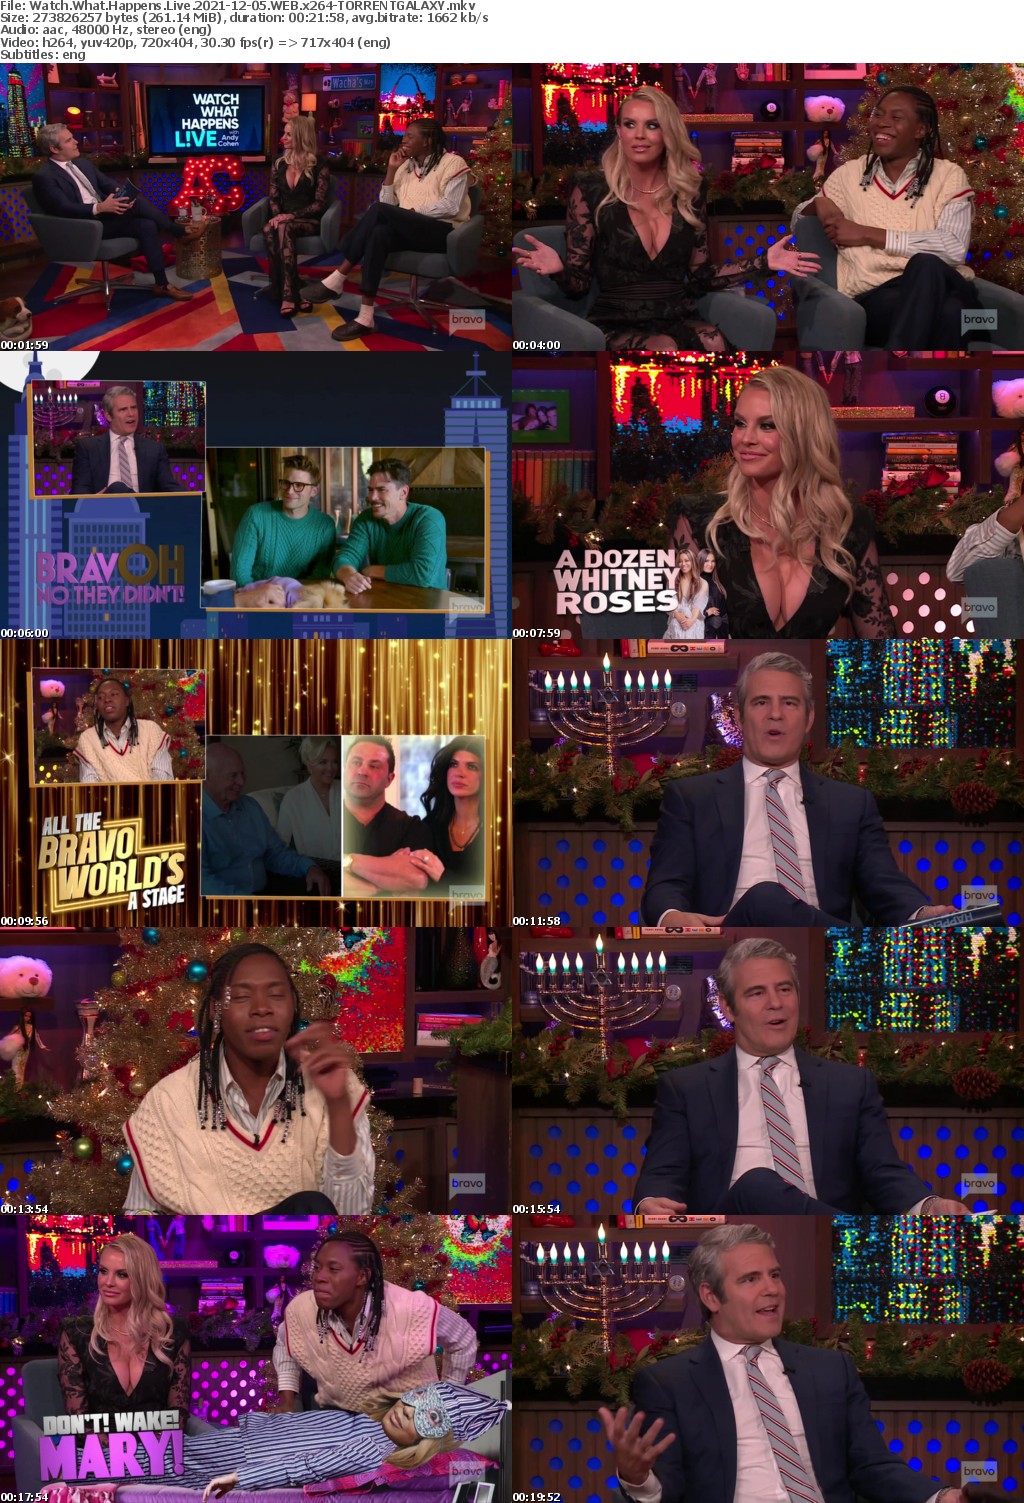 Watch What Happens Live 2021-12-05 WEB x264-GALAXY